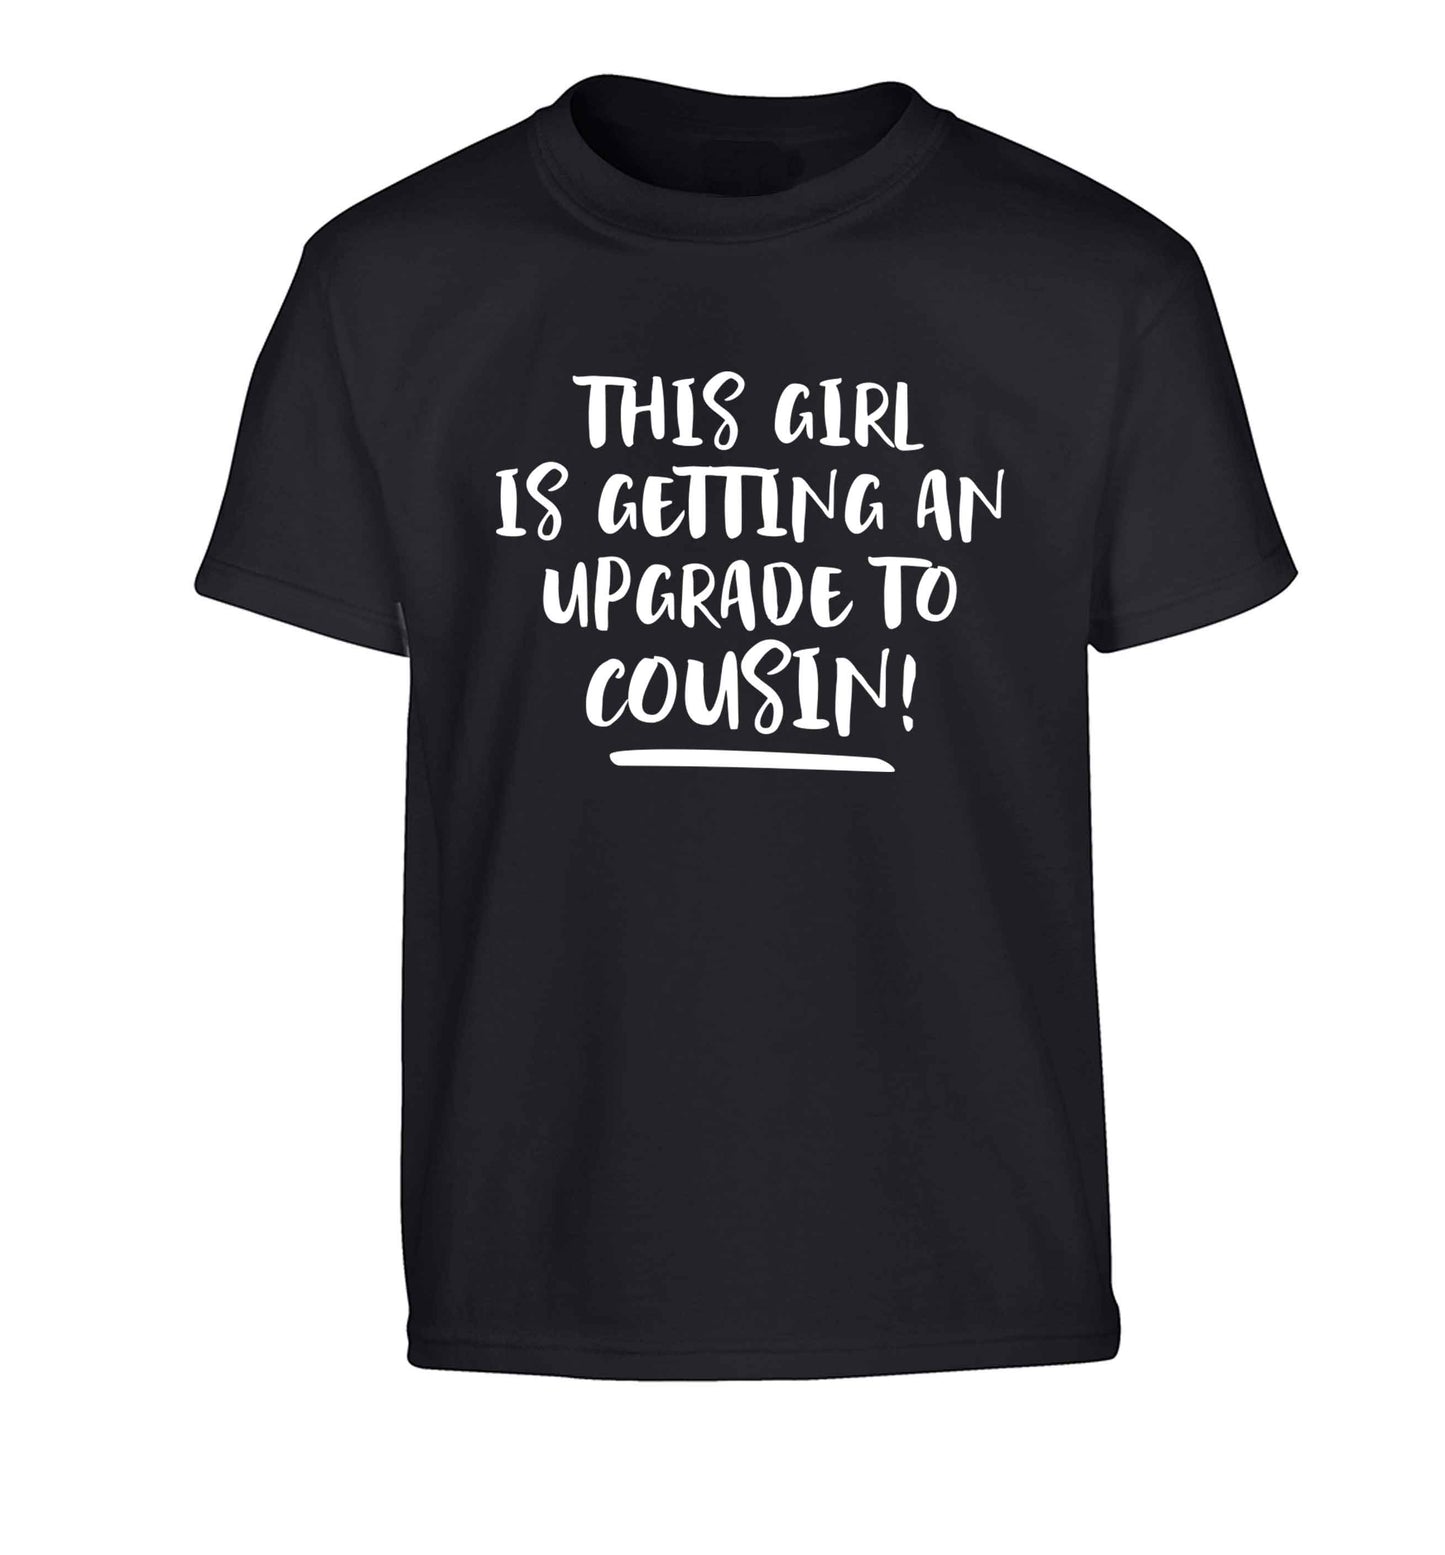 This girl is getting an upgrade to cousin! Children's black Tshirt 12-13 Years